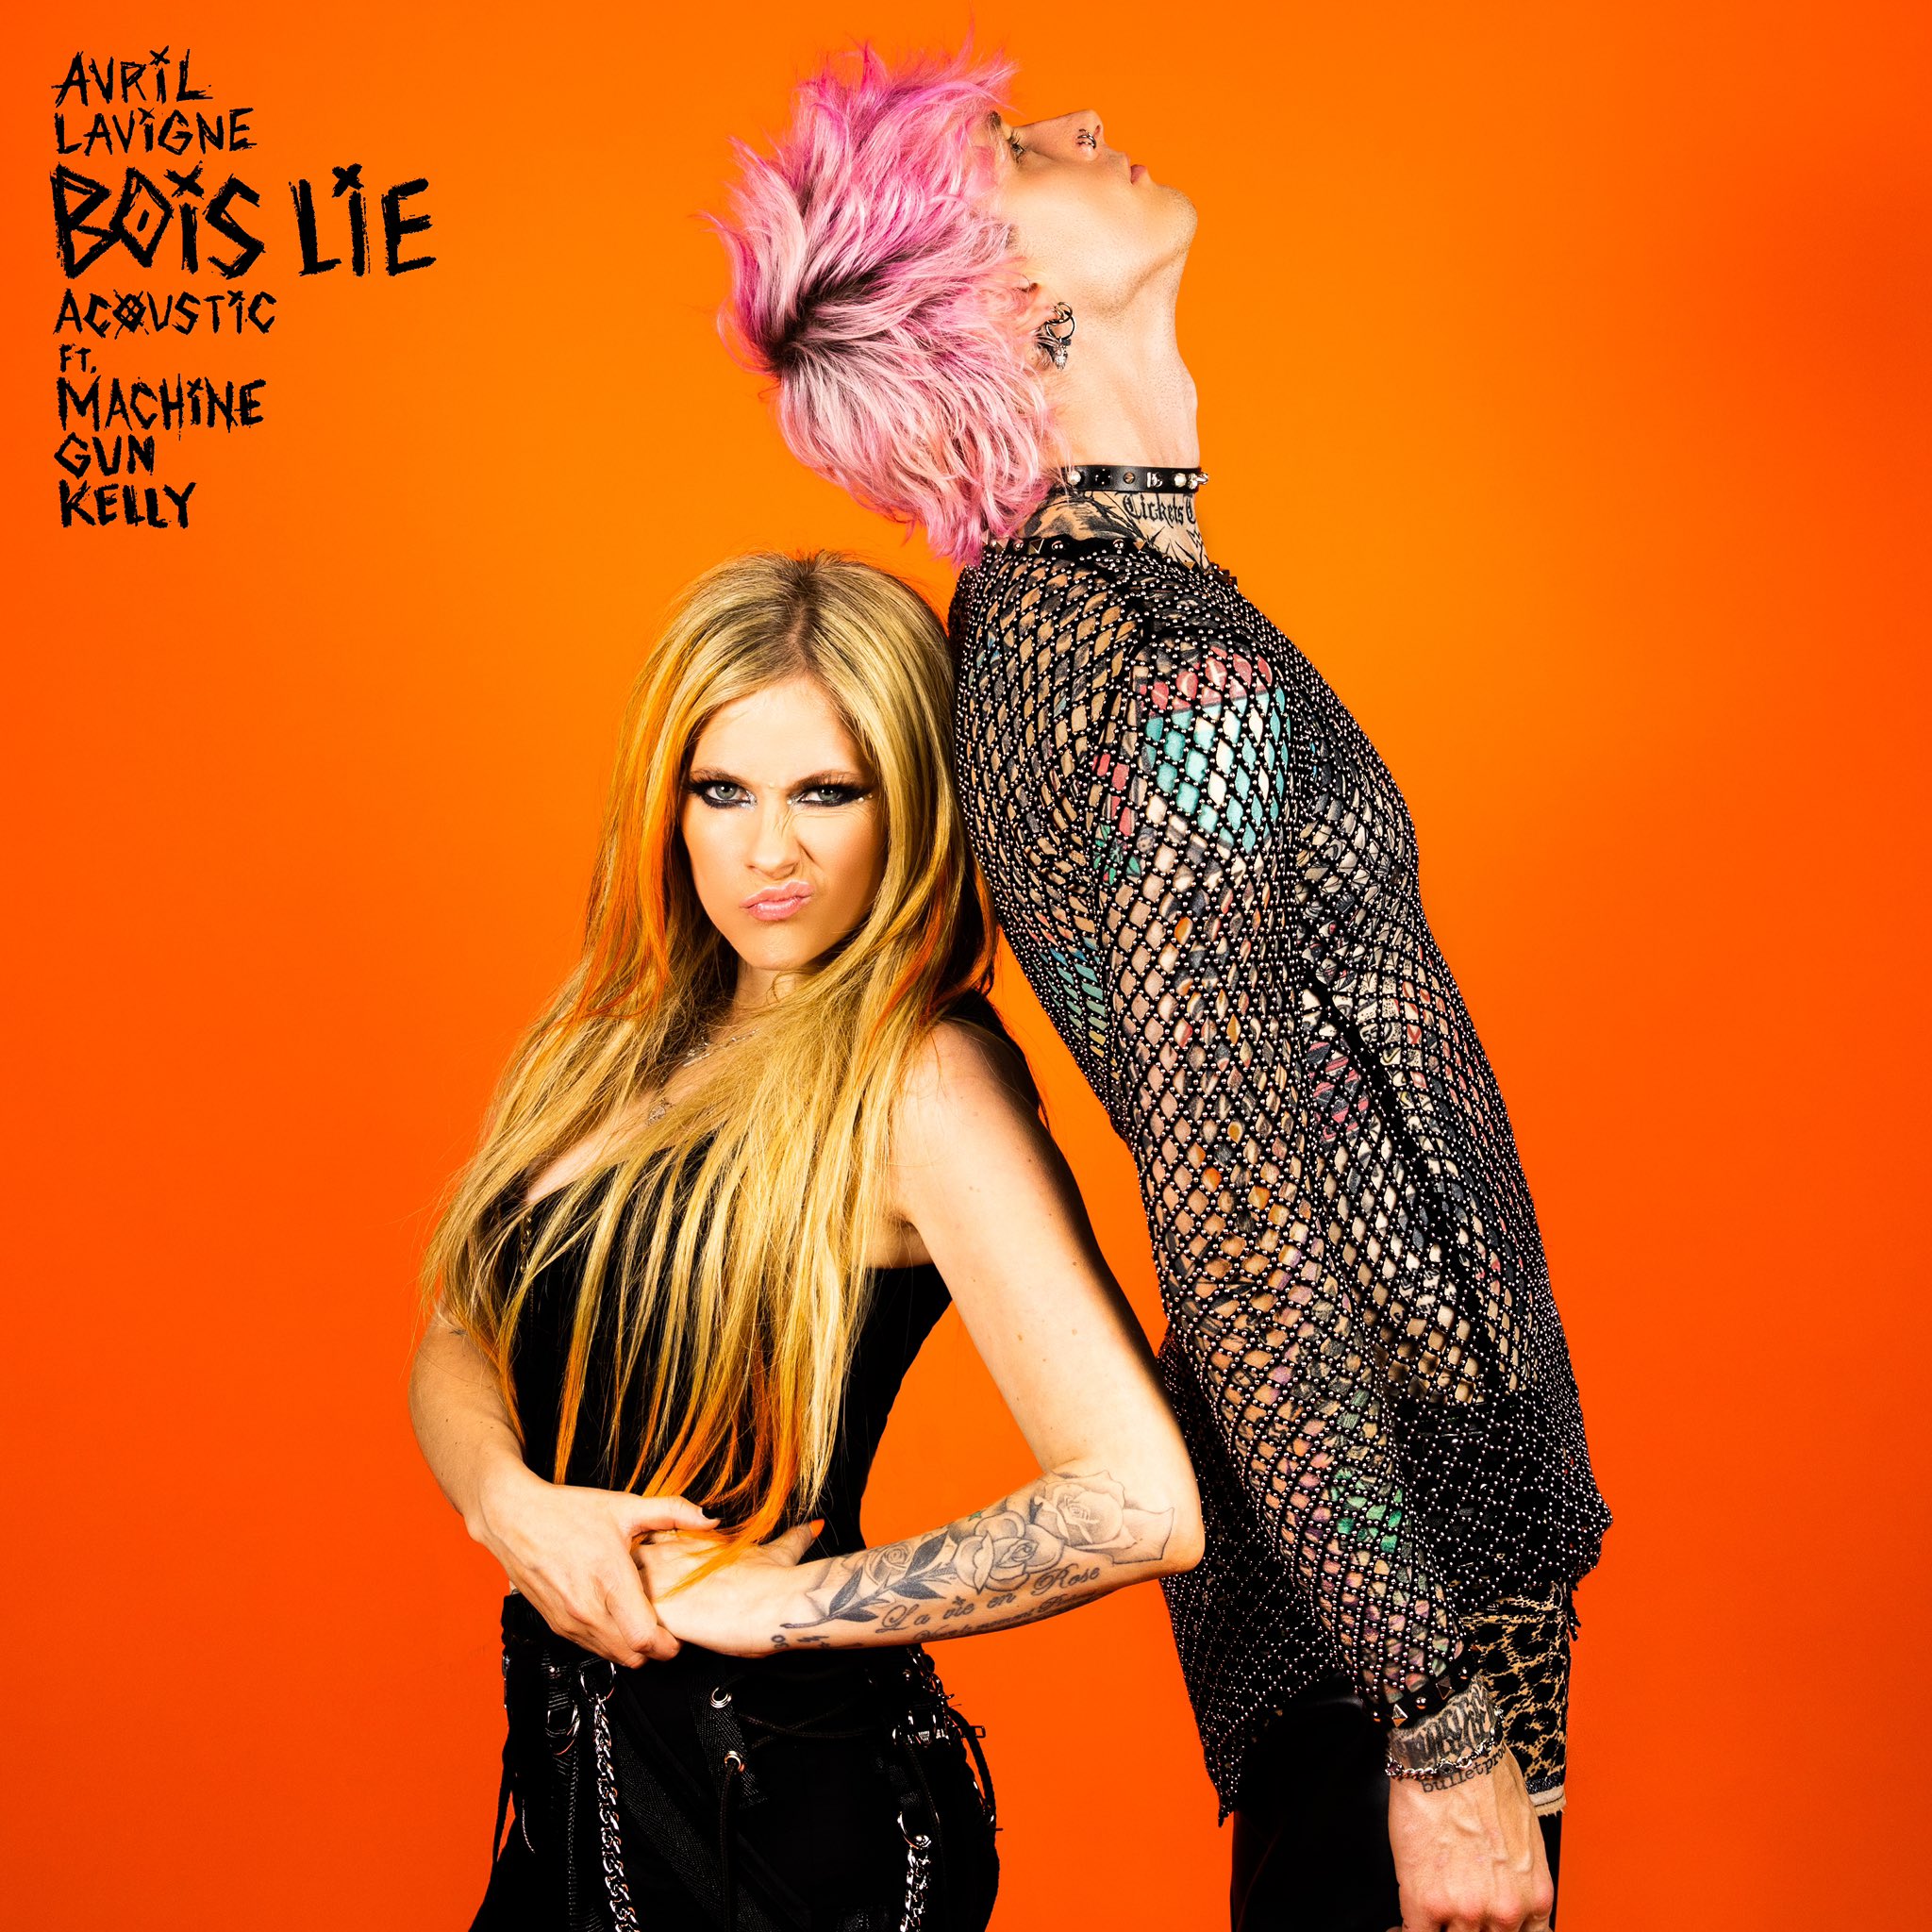 Avril Lavigne in black top and pants pouts as pink-haired Machine Gun Kelly in fishnet shirt leans backward